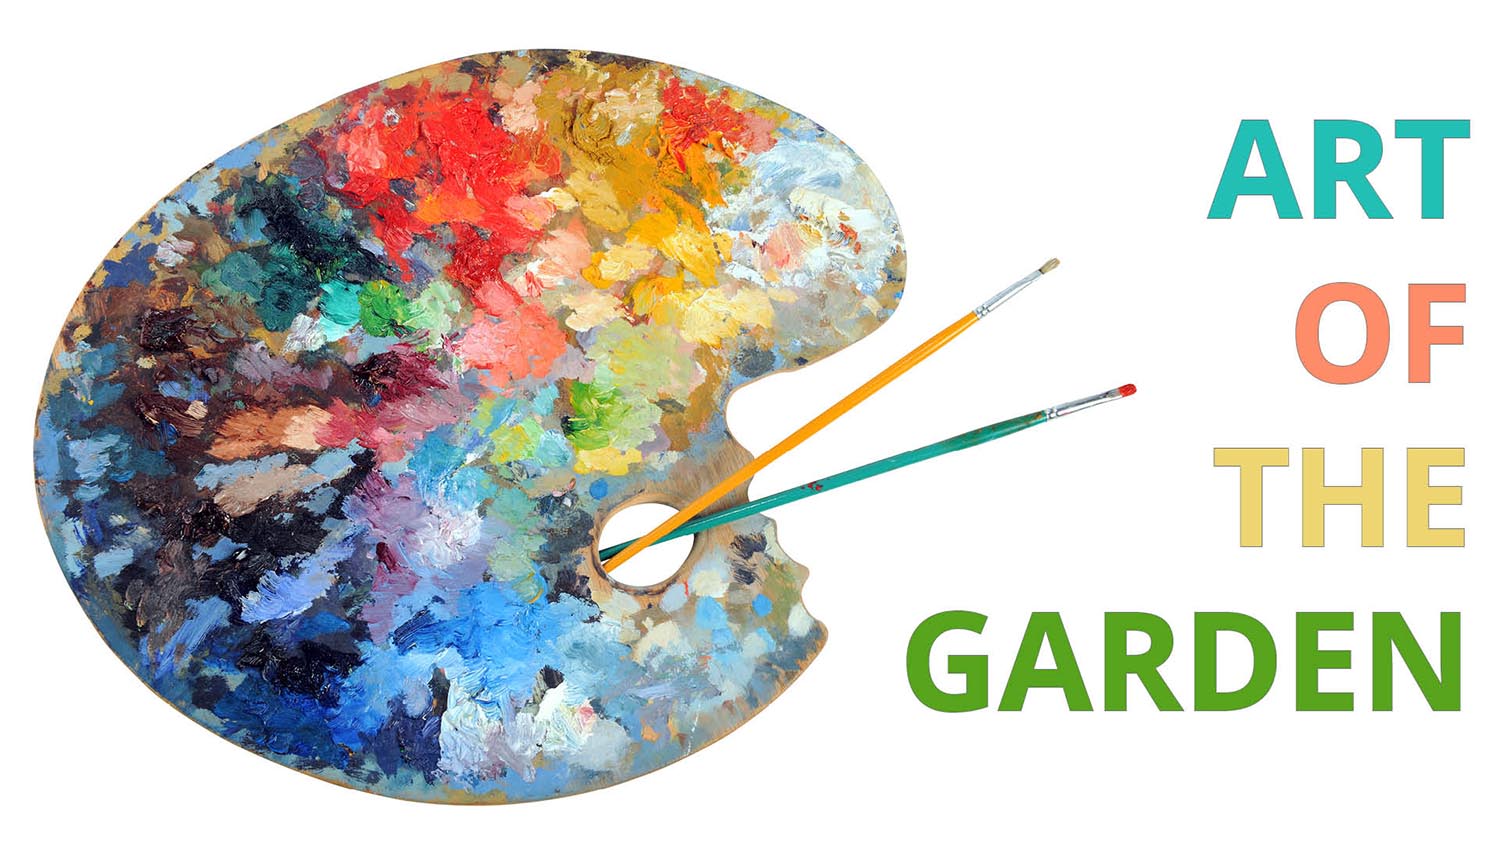 Art palette and paintbrushes on "Art of the Garden" title screen